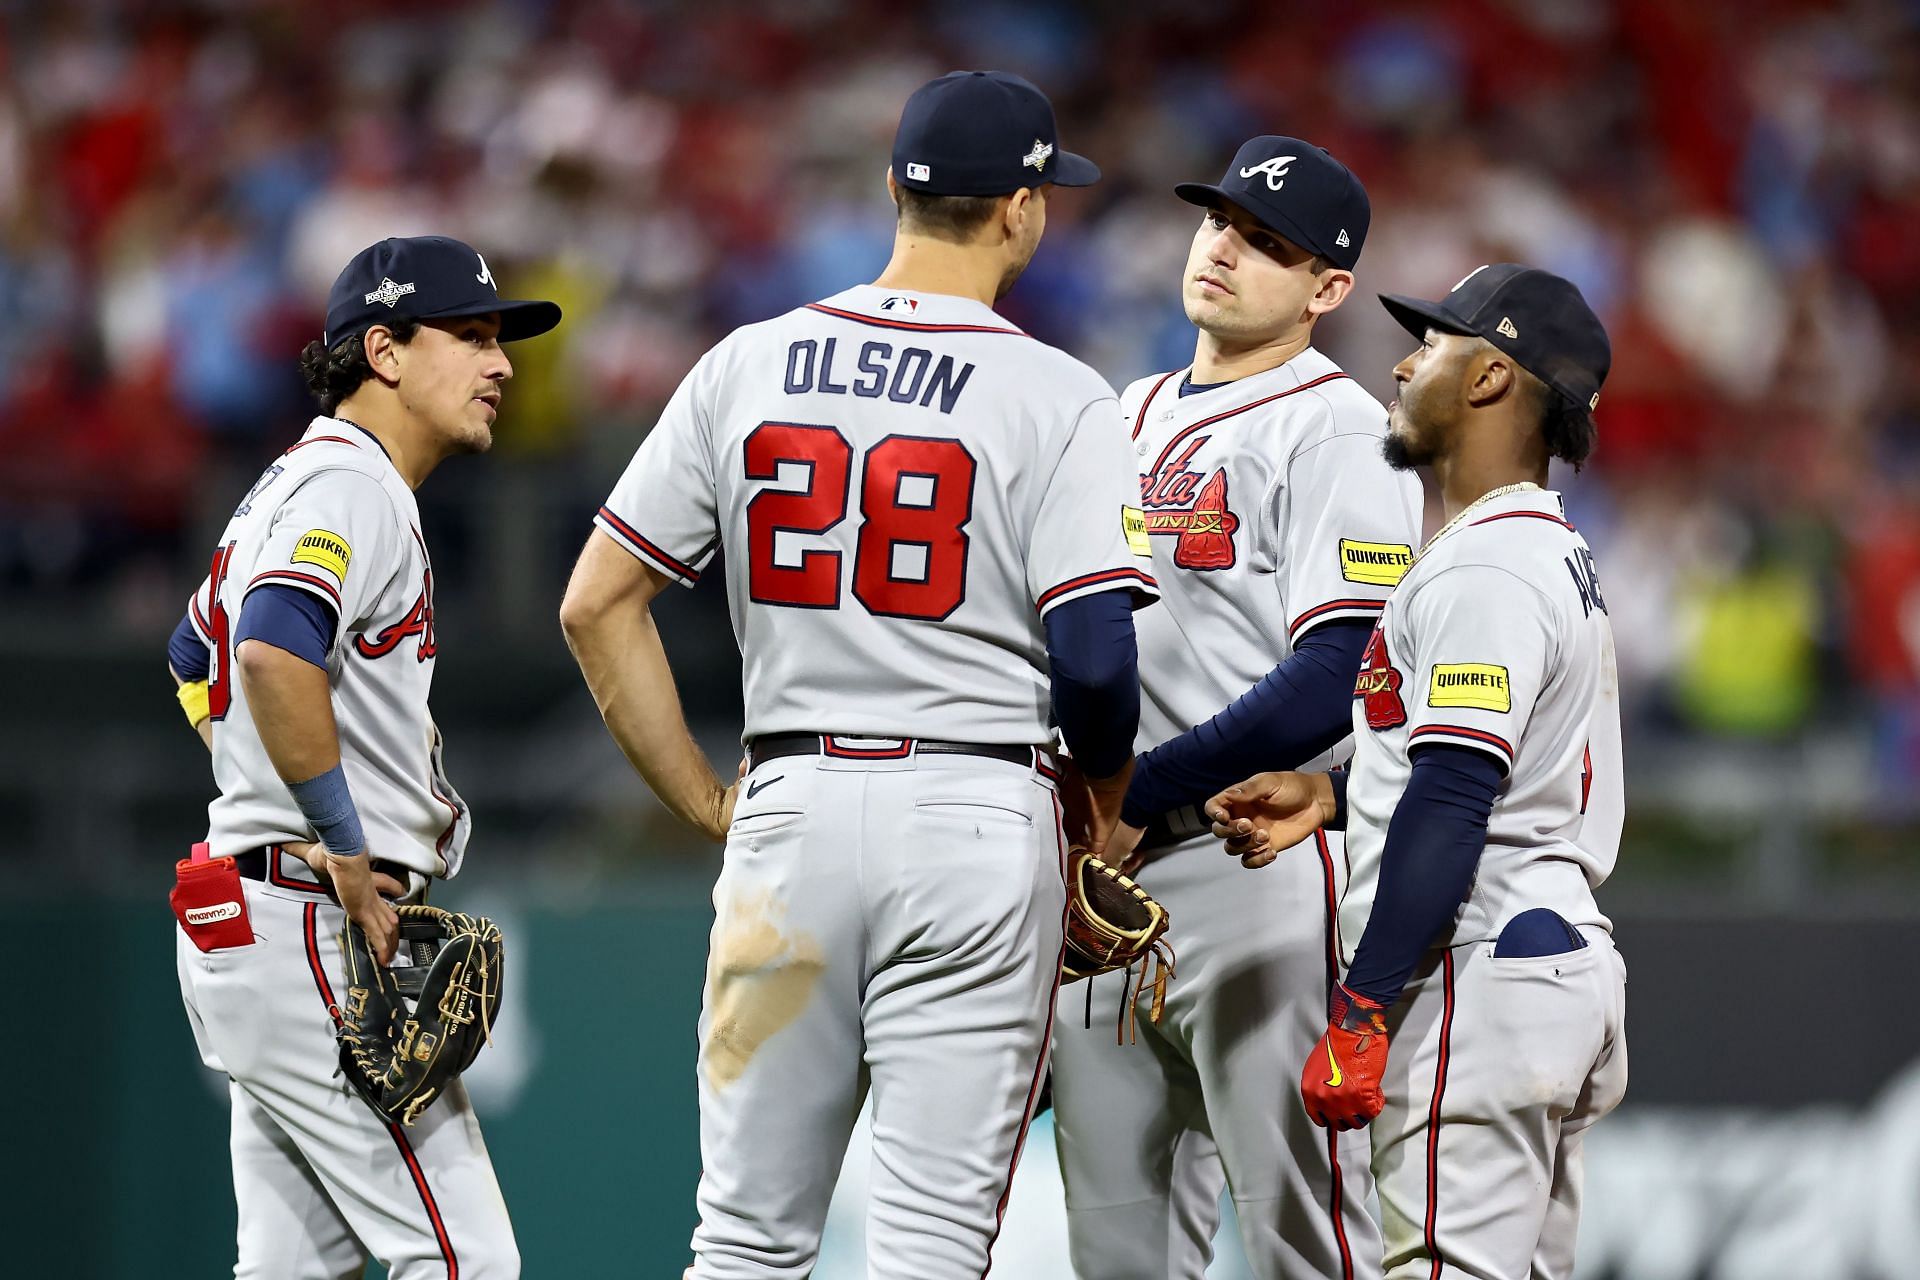 The Braves had a terrible defensive showing